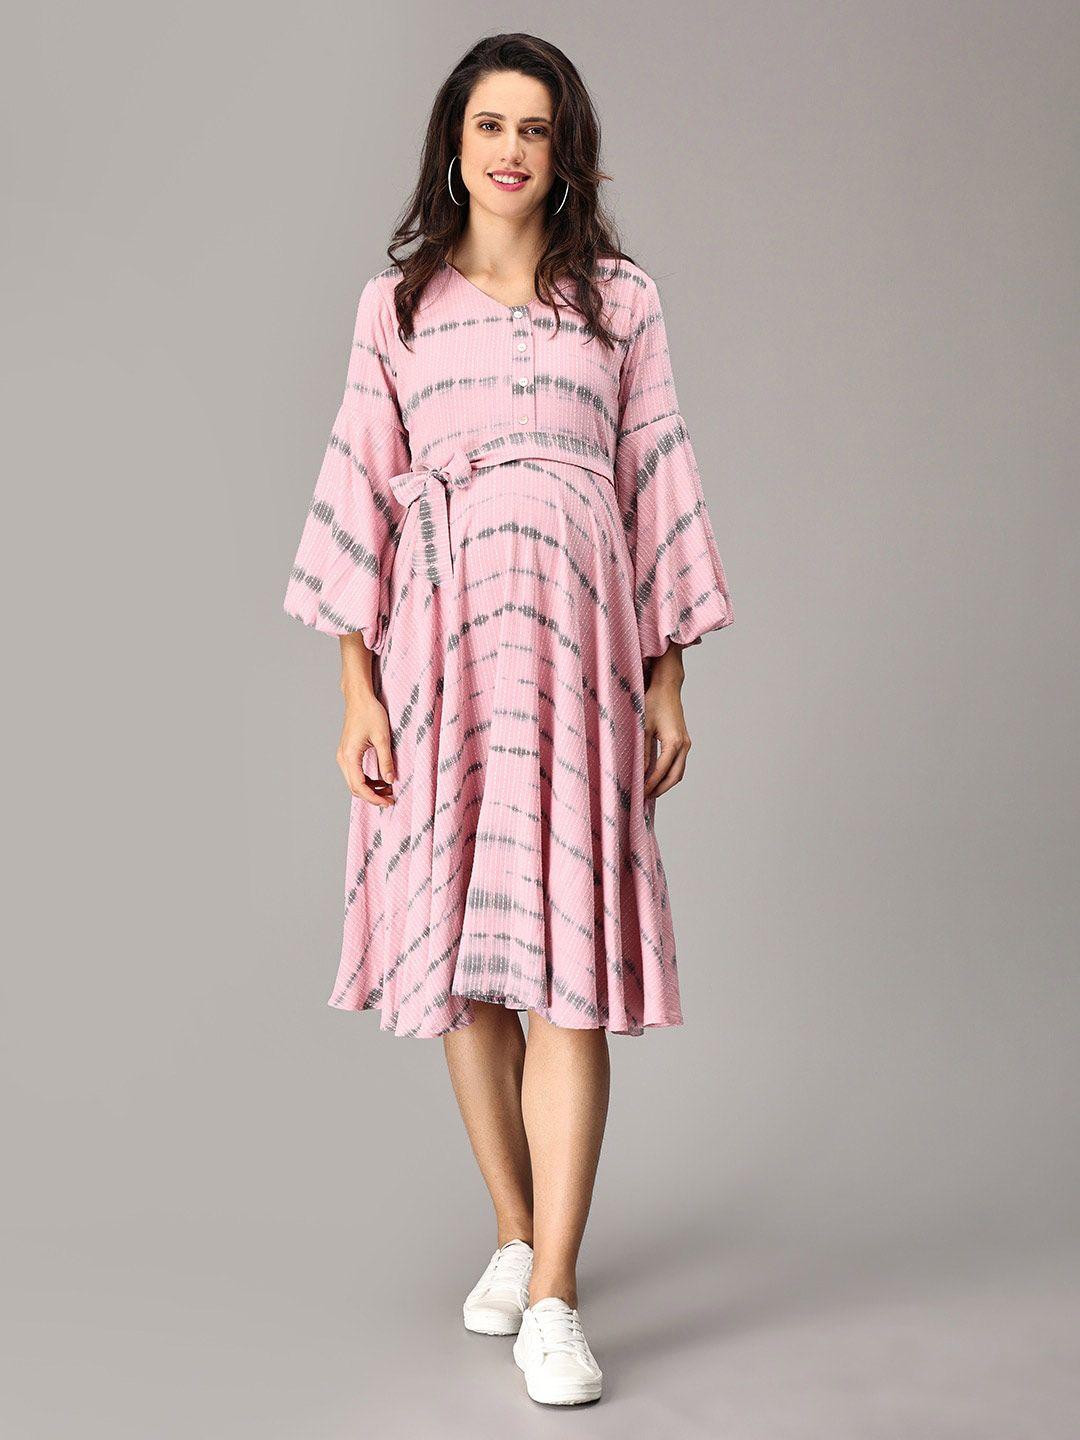 the mom store pink print bell sleeve a-line dress